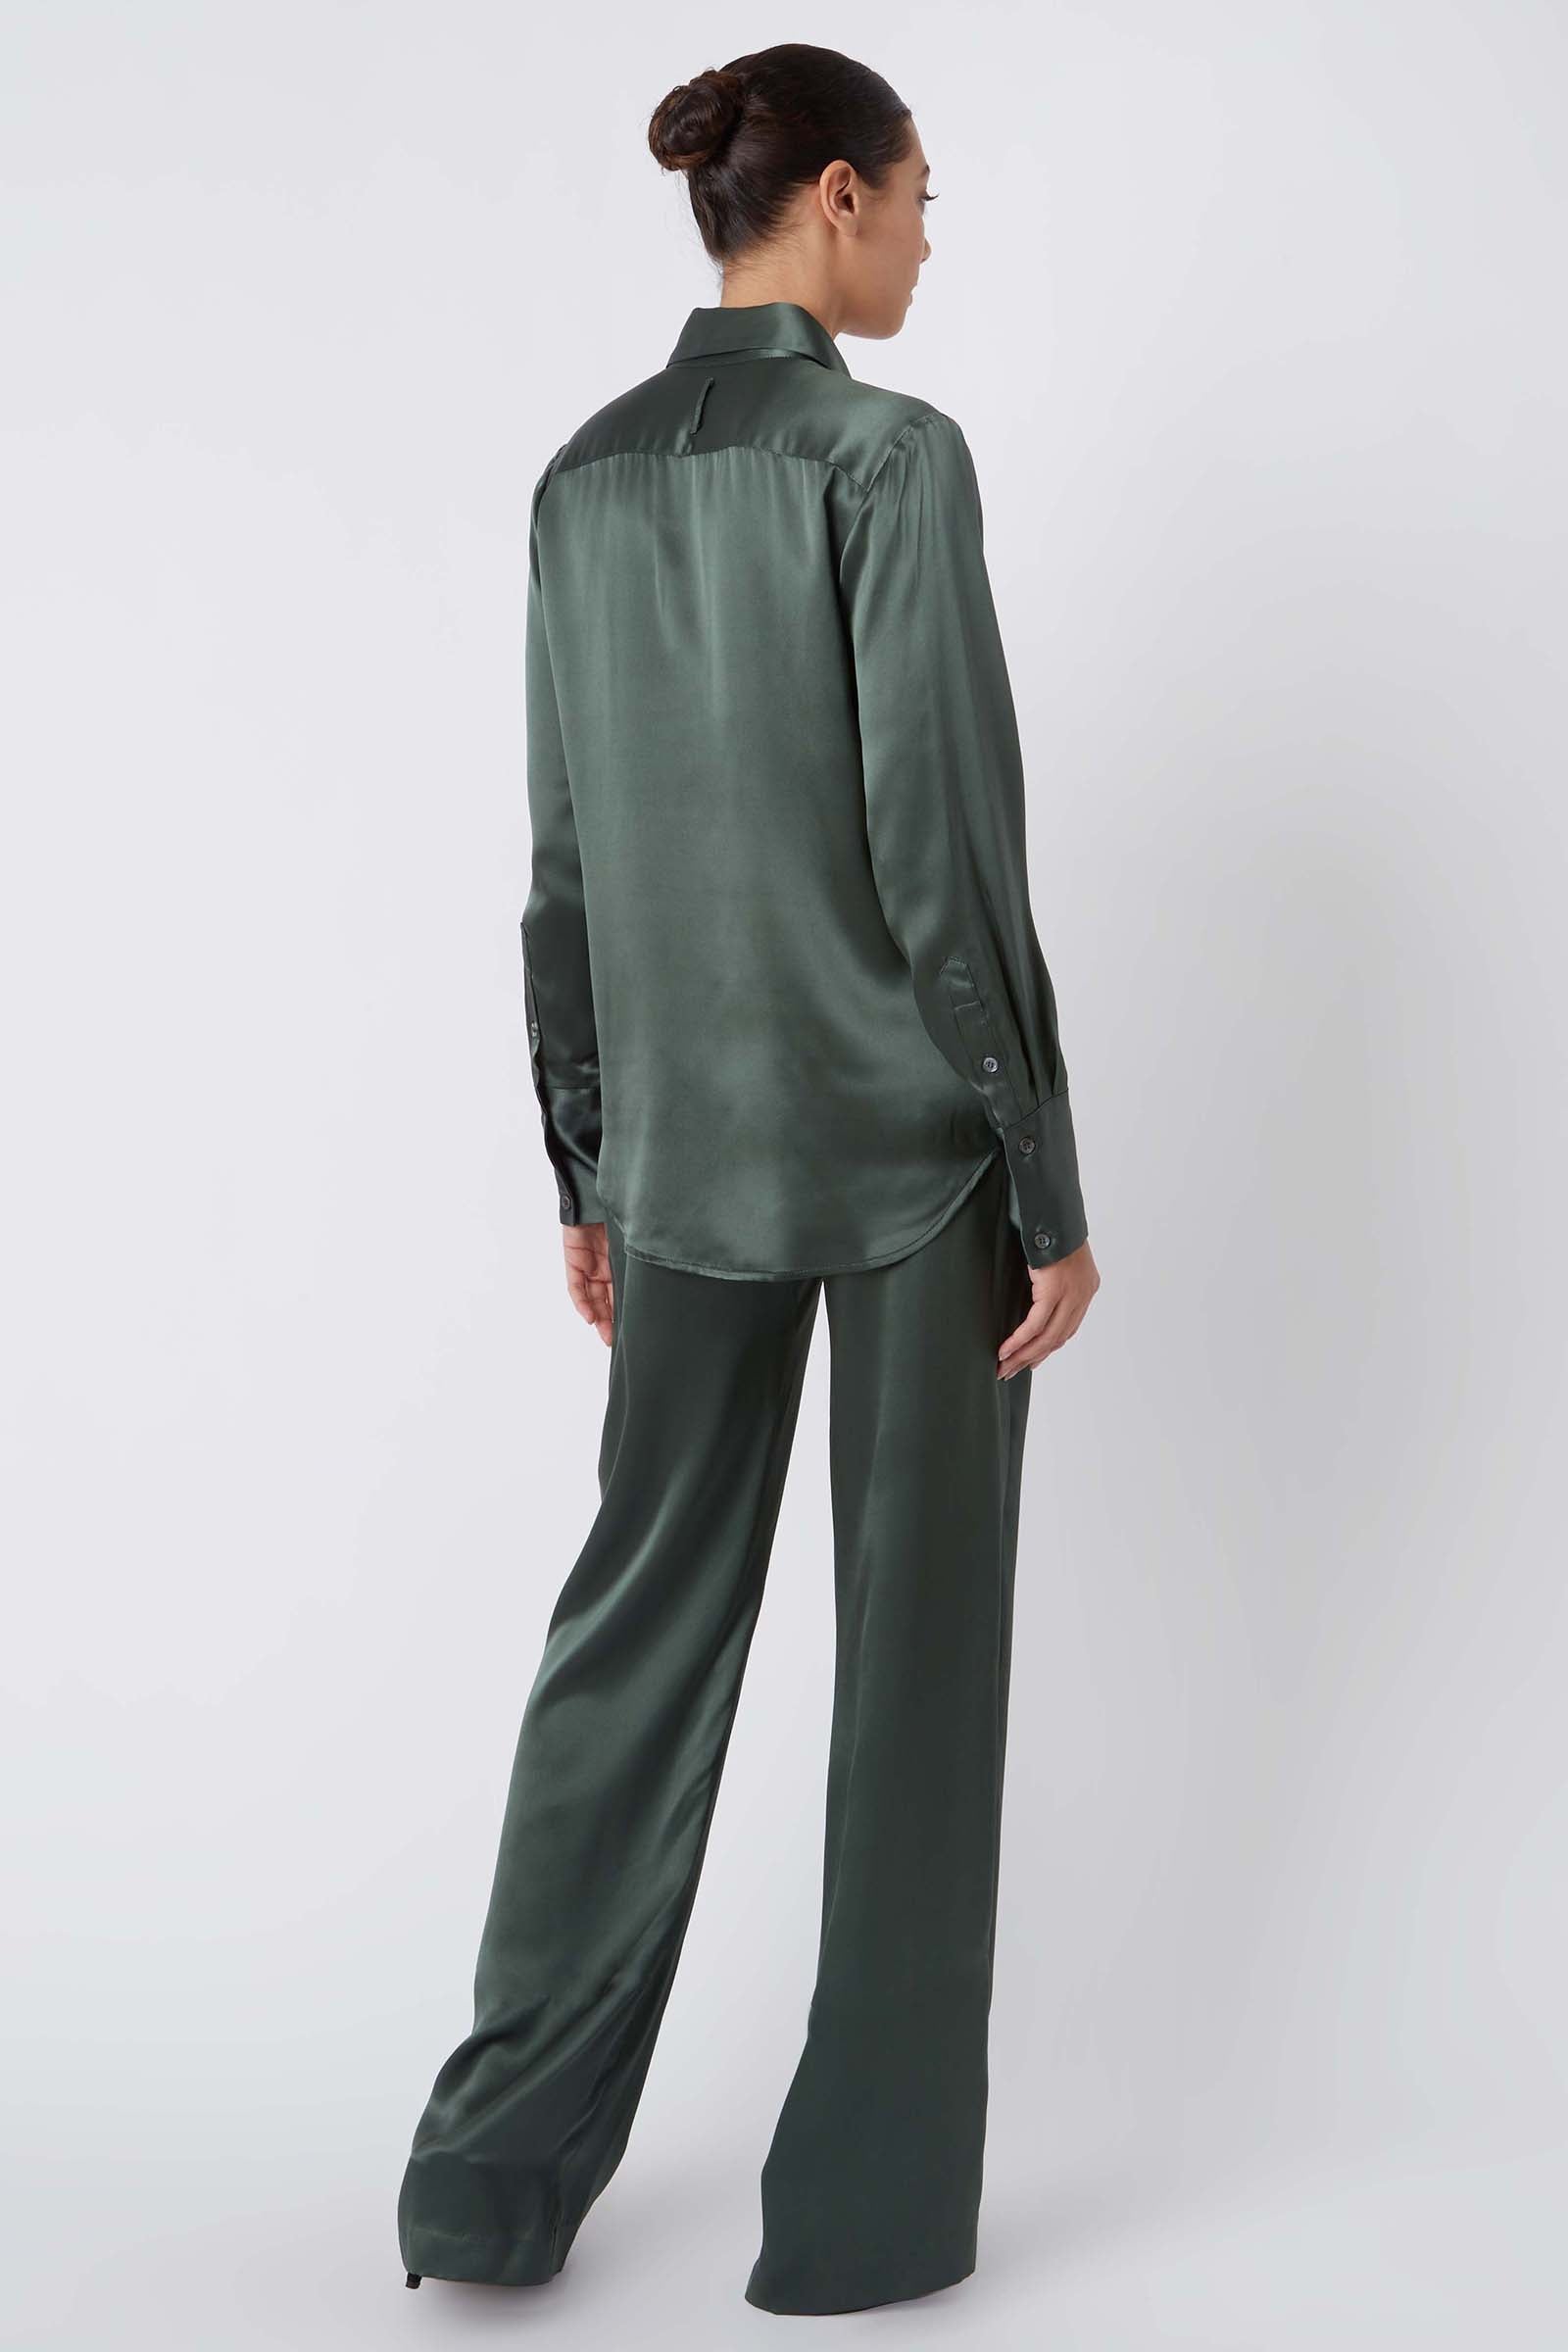 Kal Rieman Classic Tailored Blouse in Loden on Model with Hand in Pocket Cropped Front View